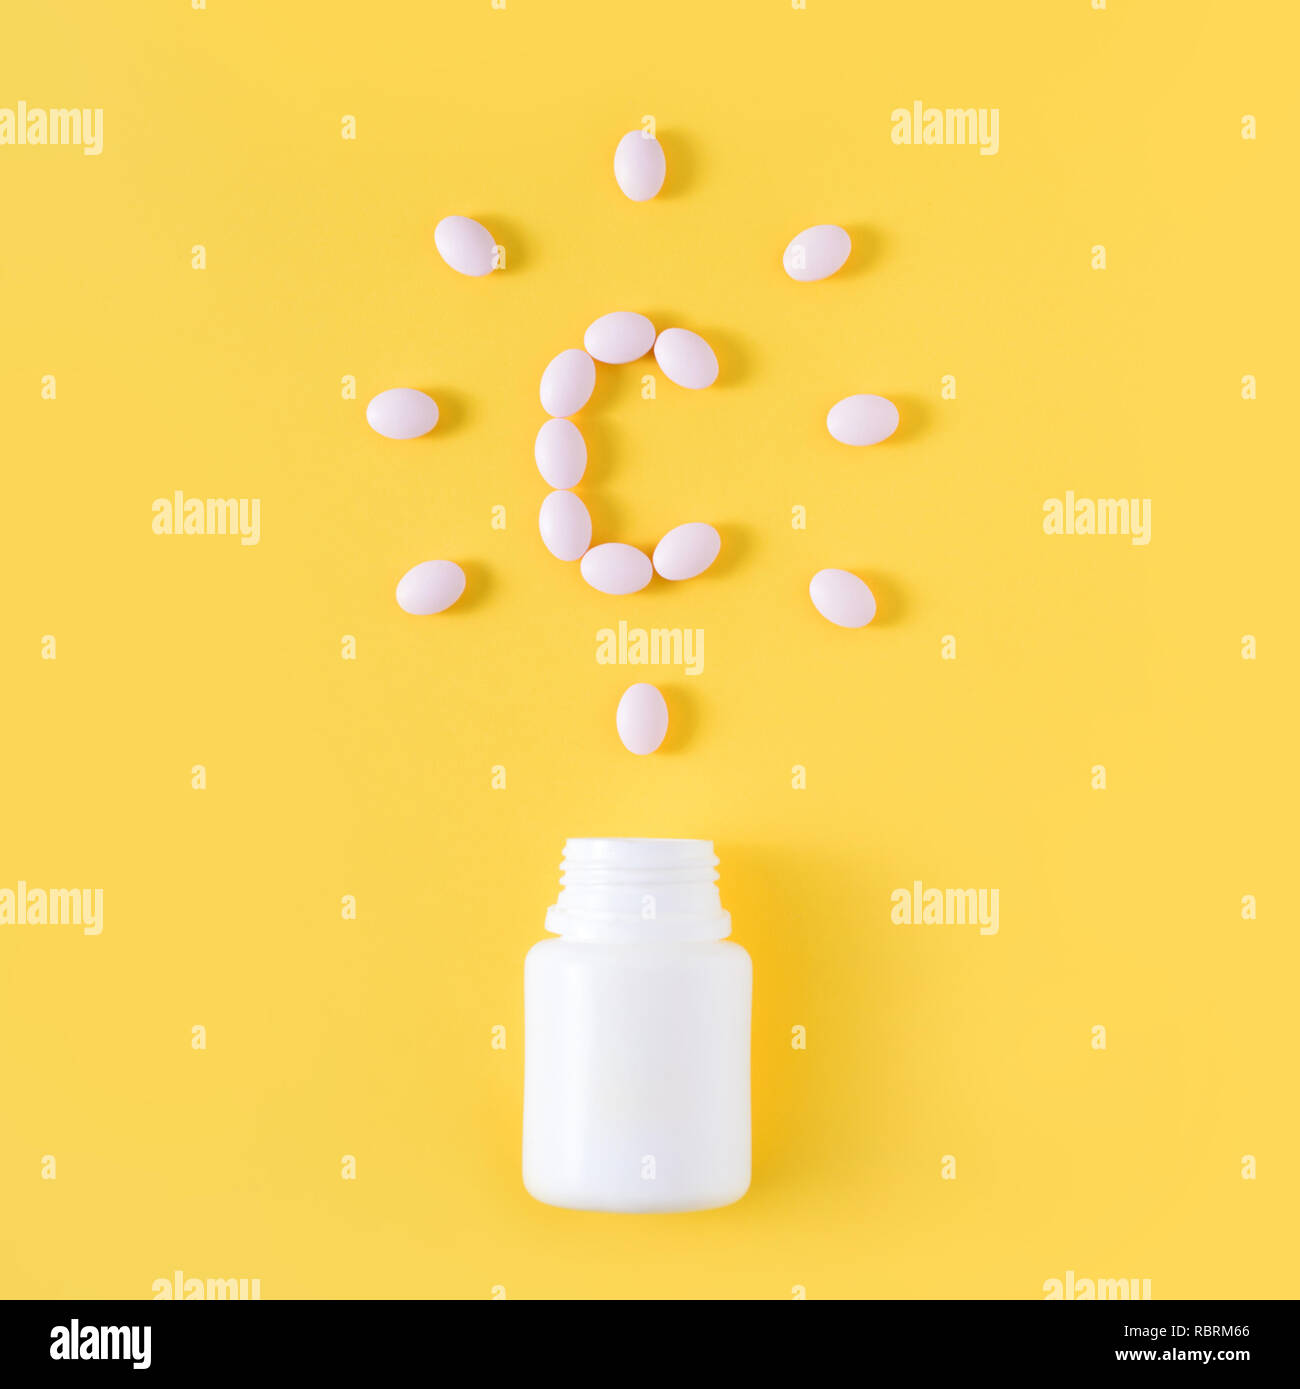 Vitamin c pills dropped from bottle on yellow background. Flat lay, top view. Stock Photo